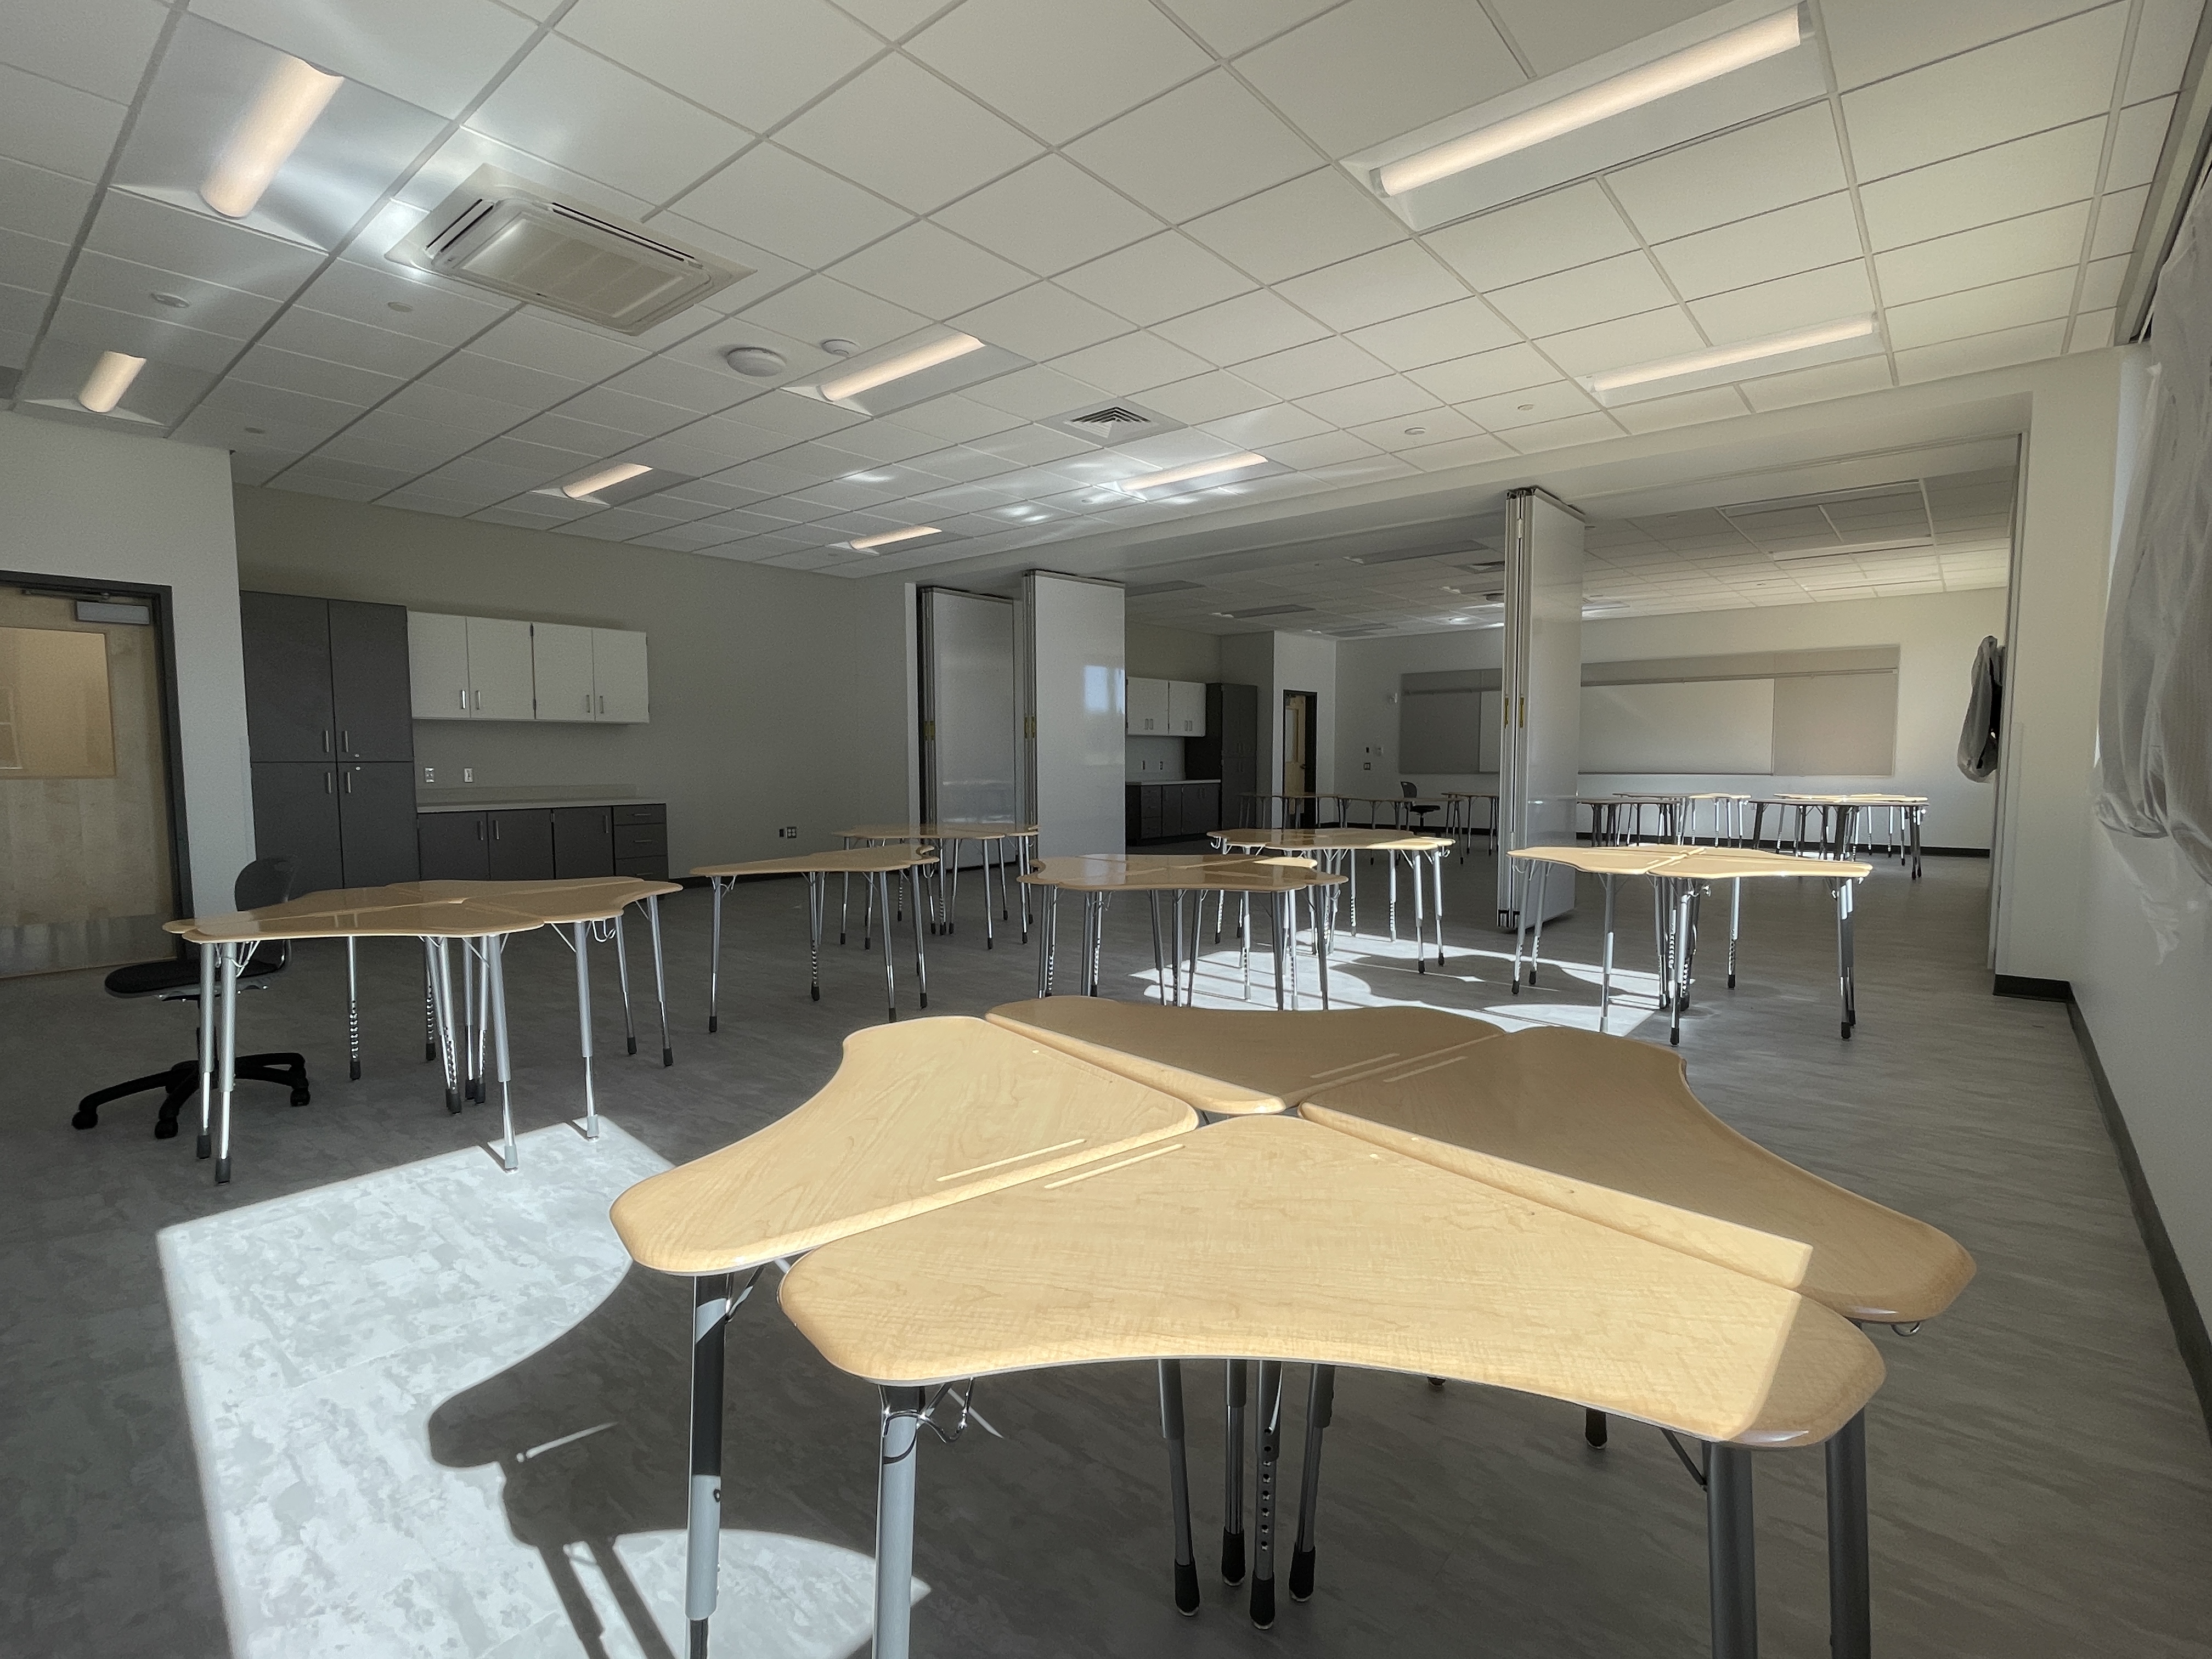 MMS Classroom with desks